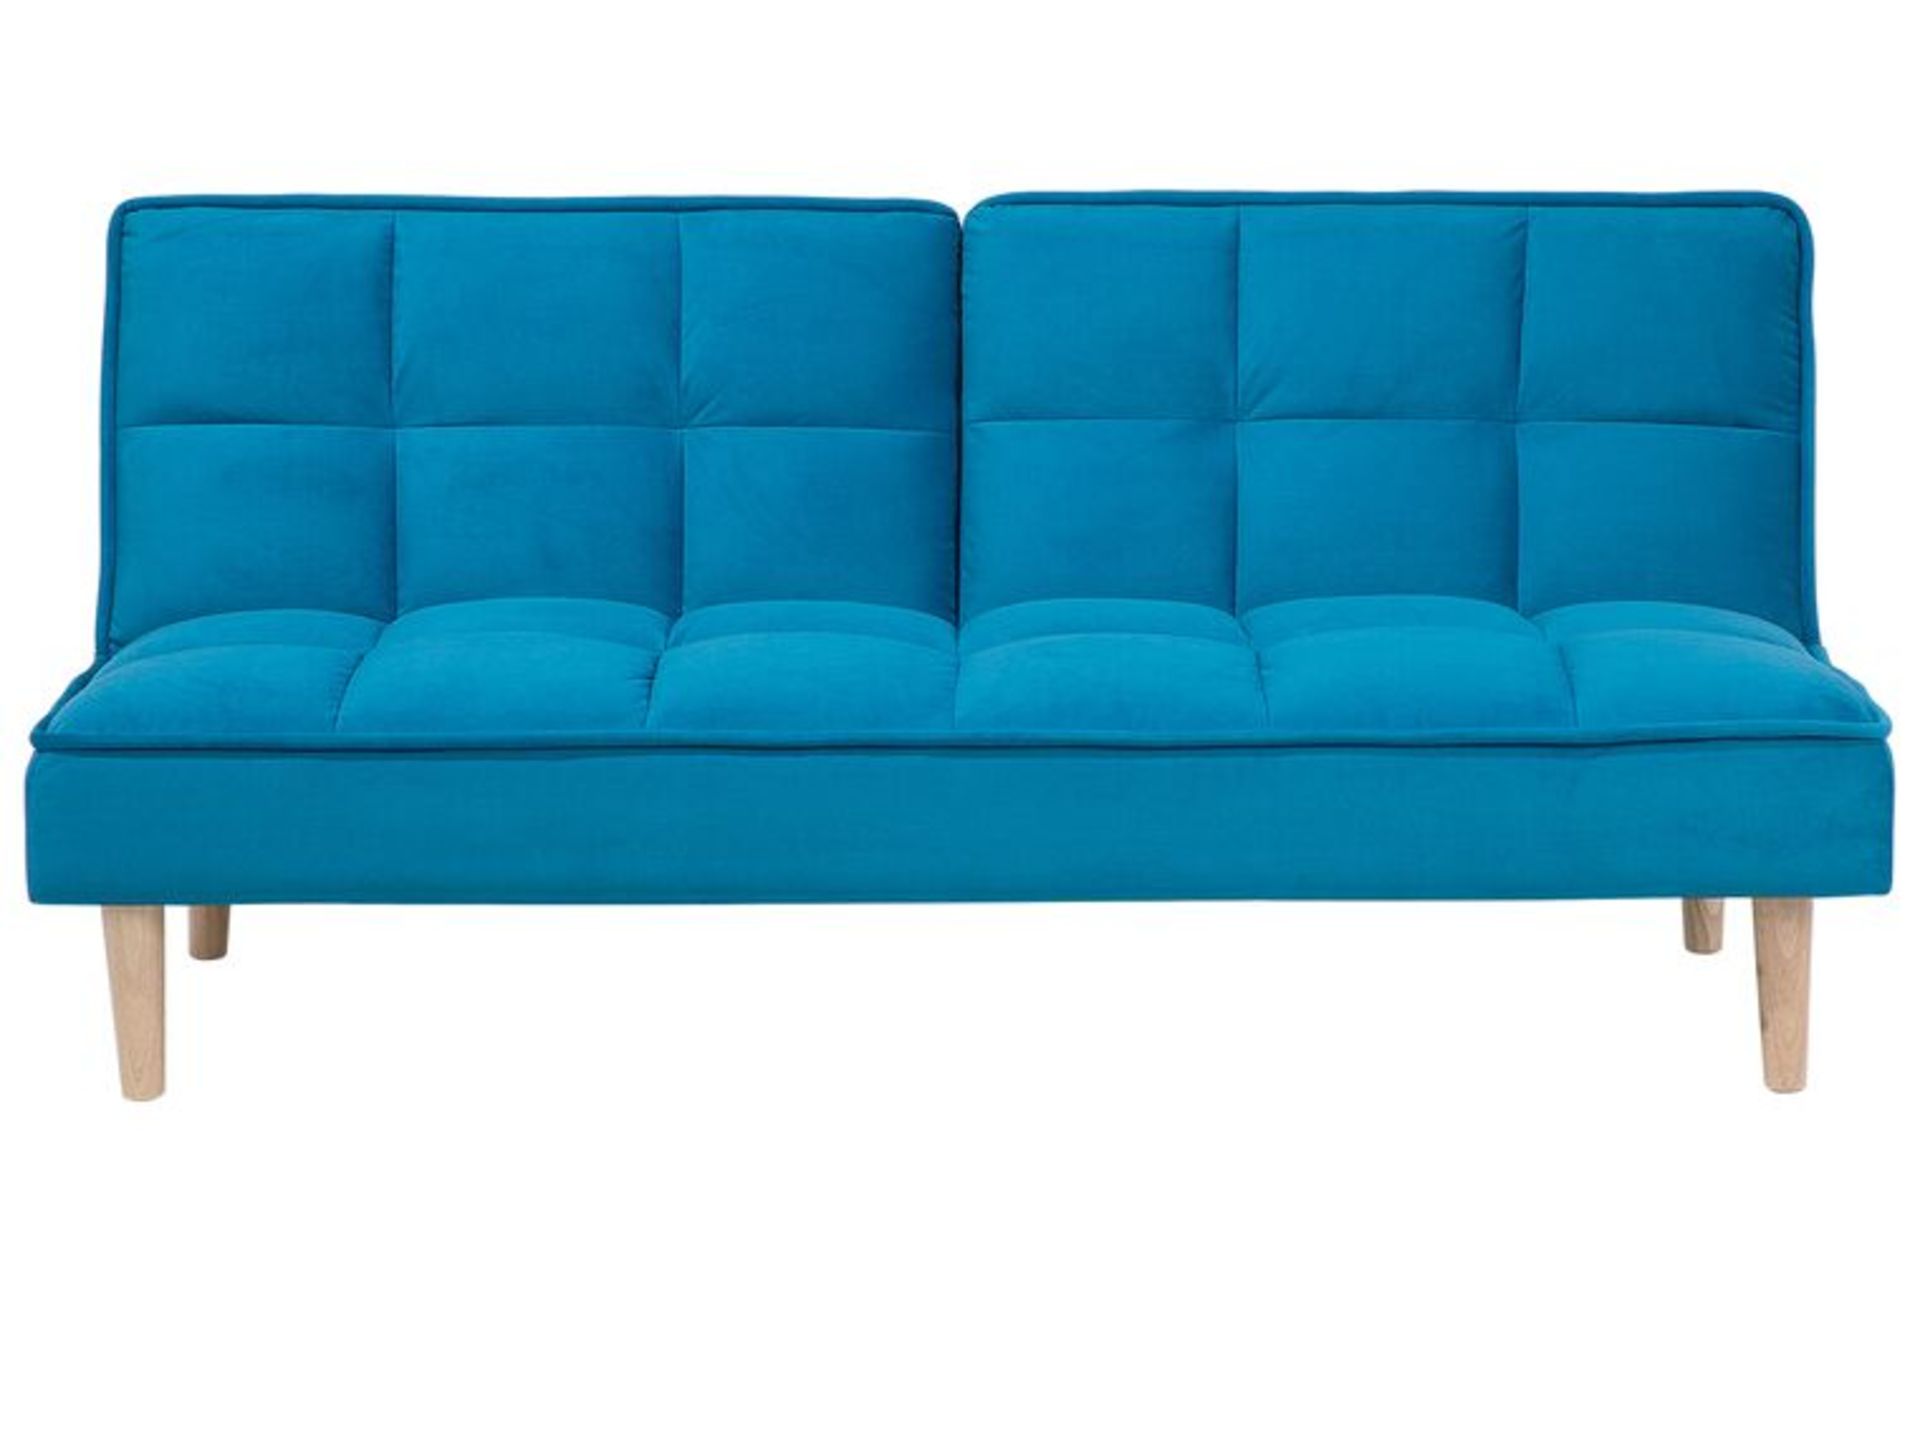 Siljan Fabric Sofa Bed Blue. - ER. Simple, clean style combined with functionality, this 3-seater